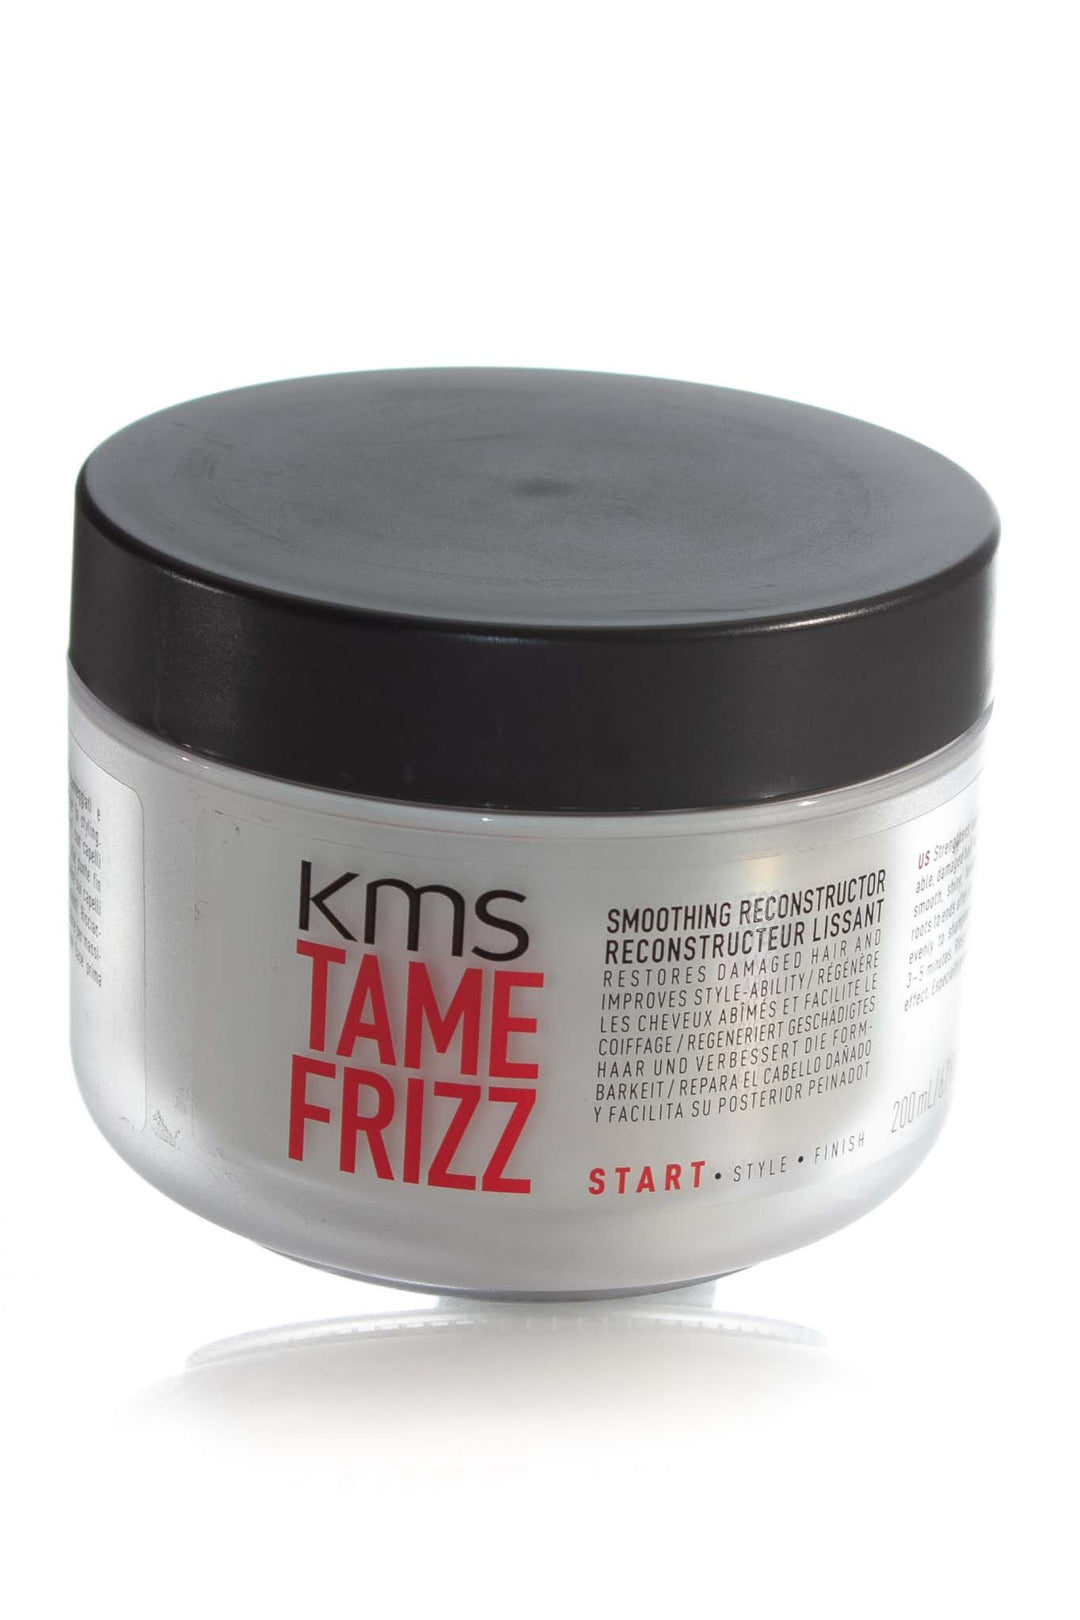 kms-tame-frizz-smoothing-reconstructor-200ml